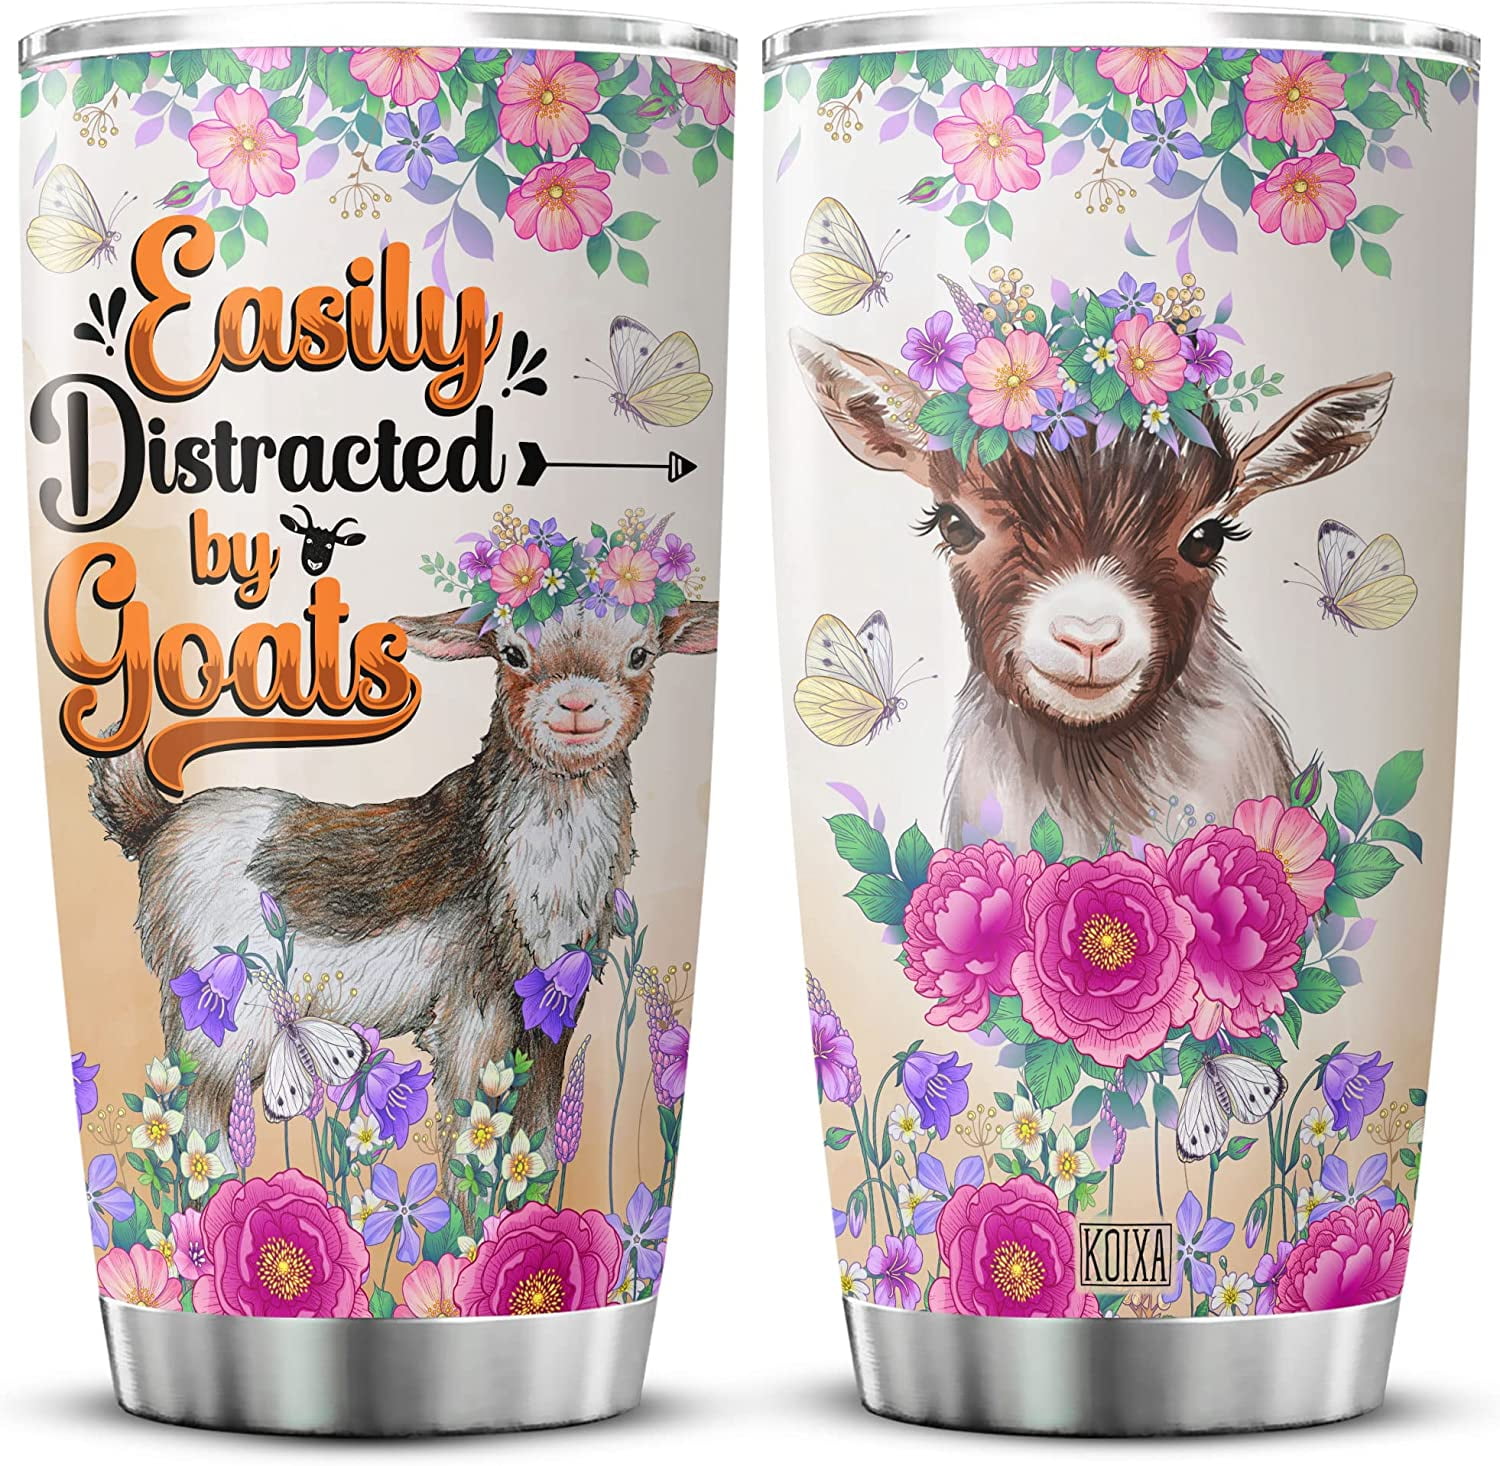 Onebttl Goat Gifts for Goat Lovers, Farm Gifts for Girl, Easily Distracted  by Goats, Funny Goat Gifts for Women, 12 oz Pink Stainless Steel Insulated